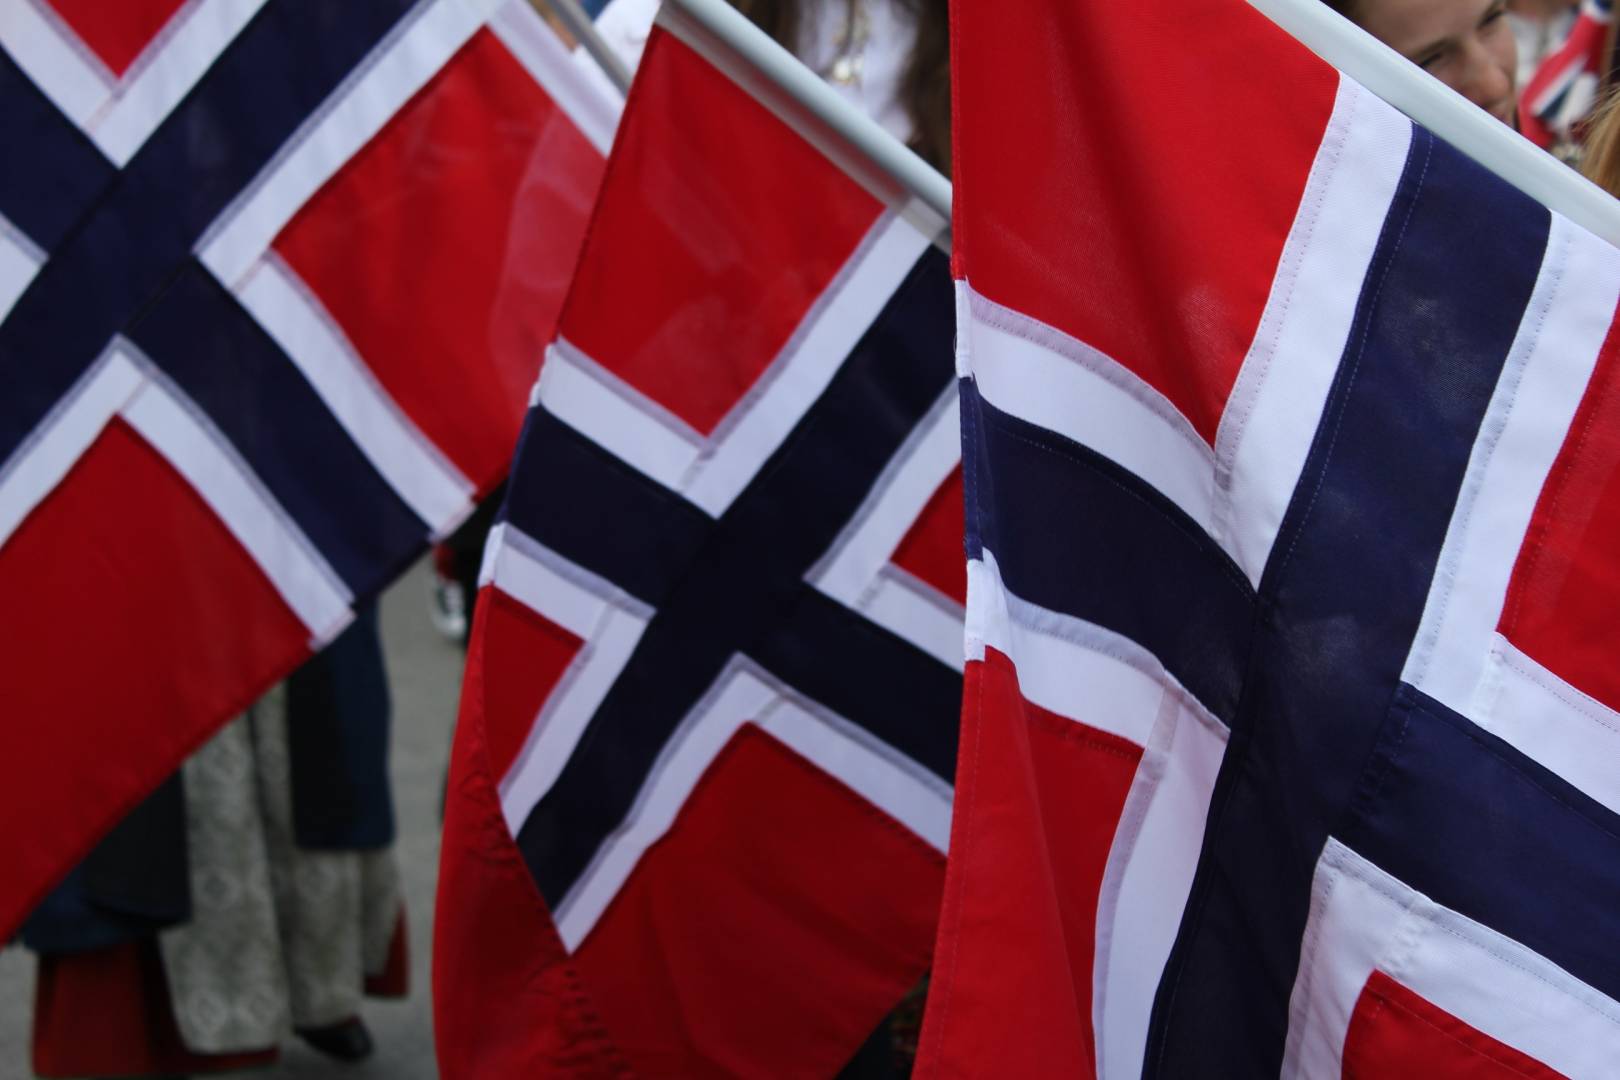 Norway casino payment ban to come into effect